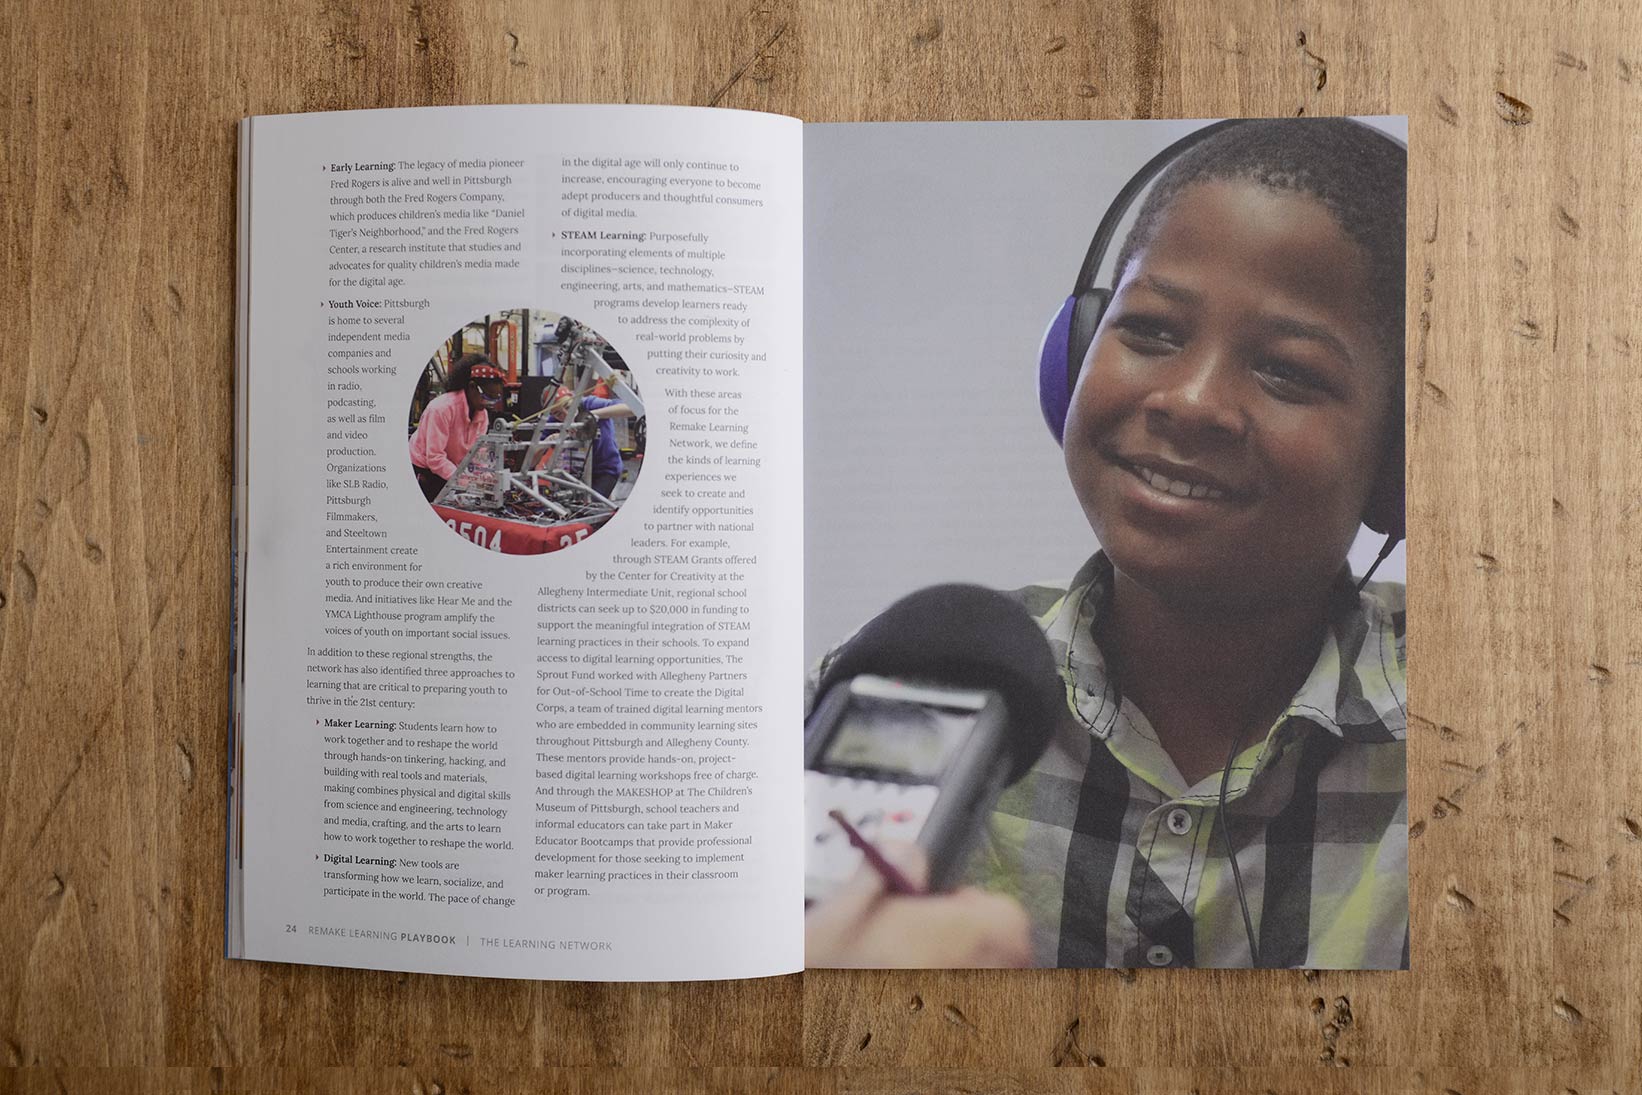 Remake Learning Playbook double-page spread featuring a boy wearing headphones while being interviewed